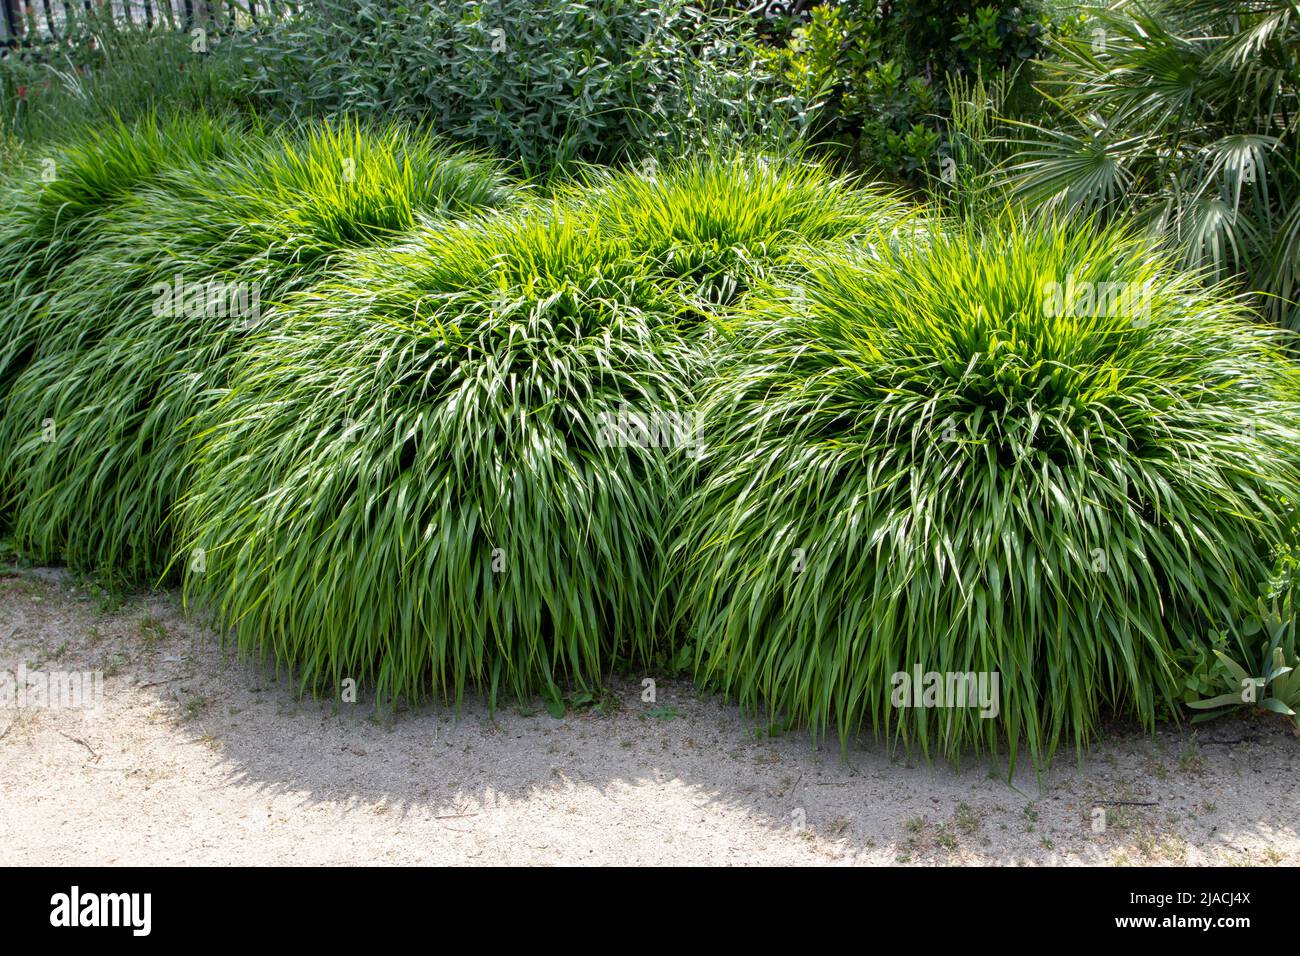 Japanese forest grass or hakonechloa macra or hakone grass bamboo-like ornamental plant with cascading mounds of lush green foliage in the sunny garde Stock Photo